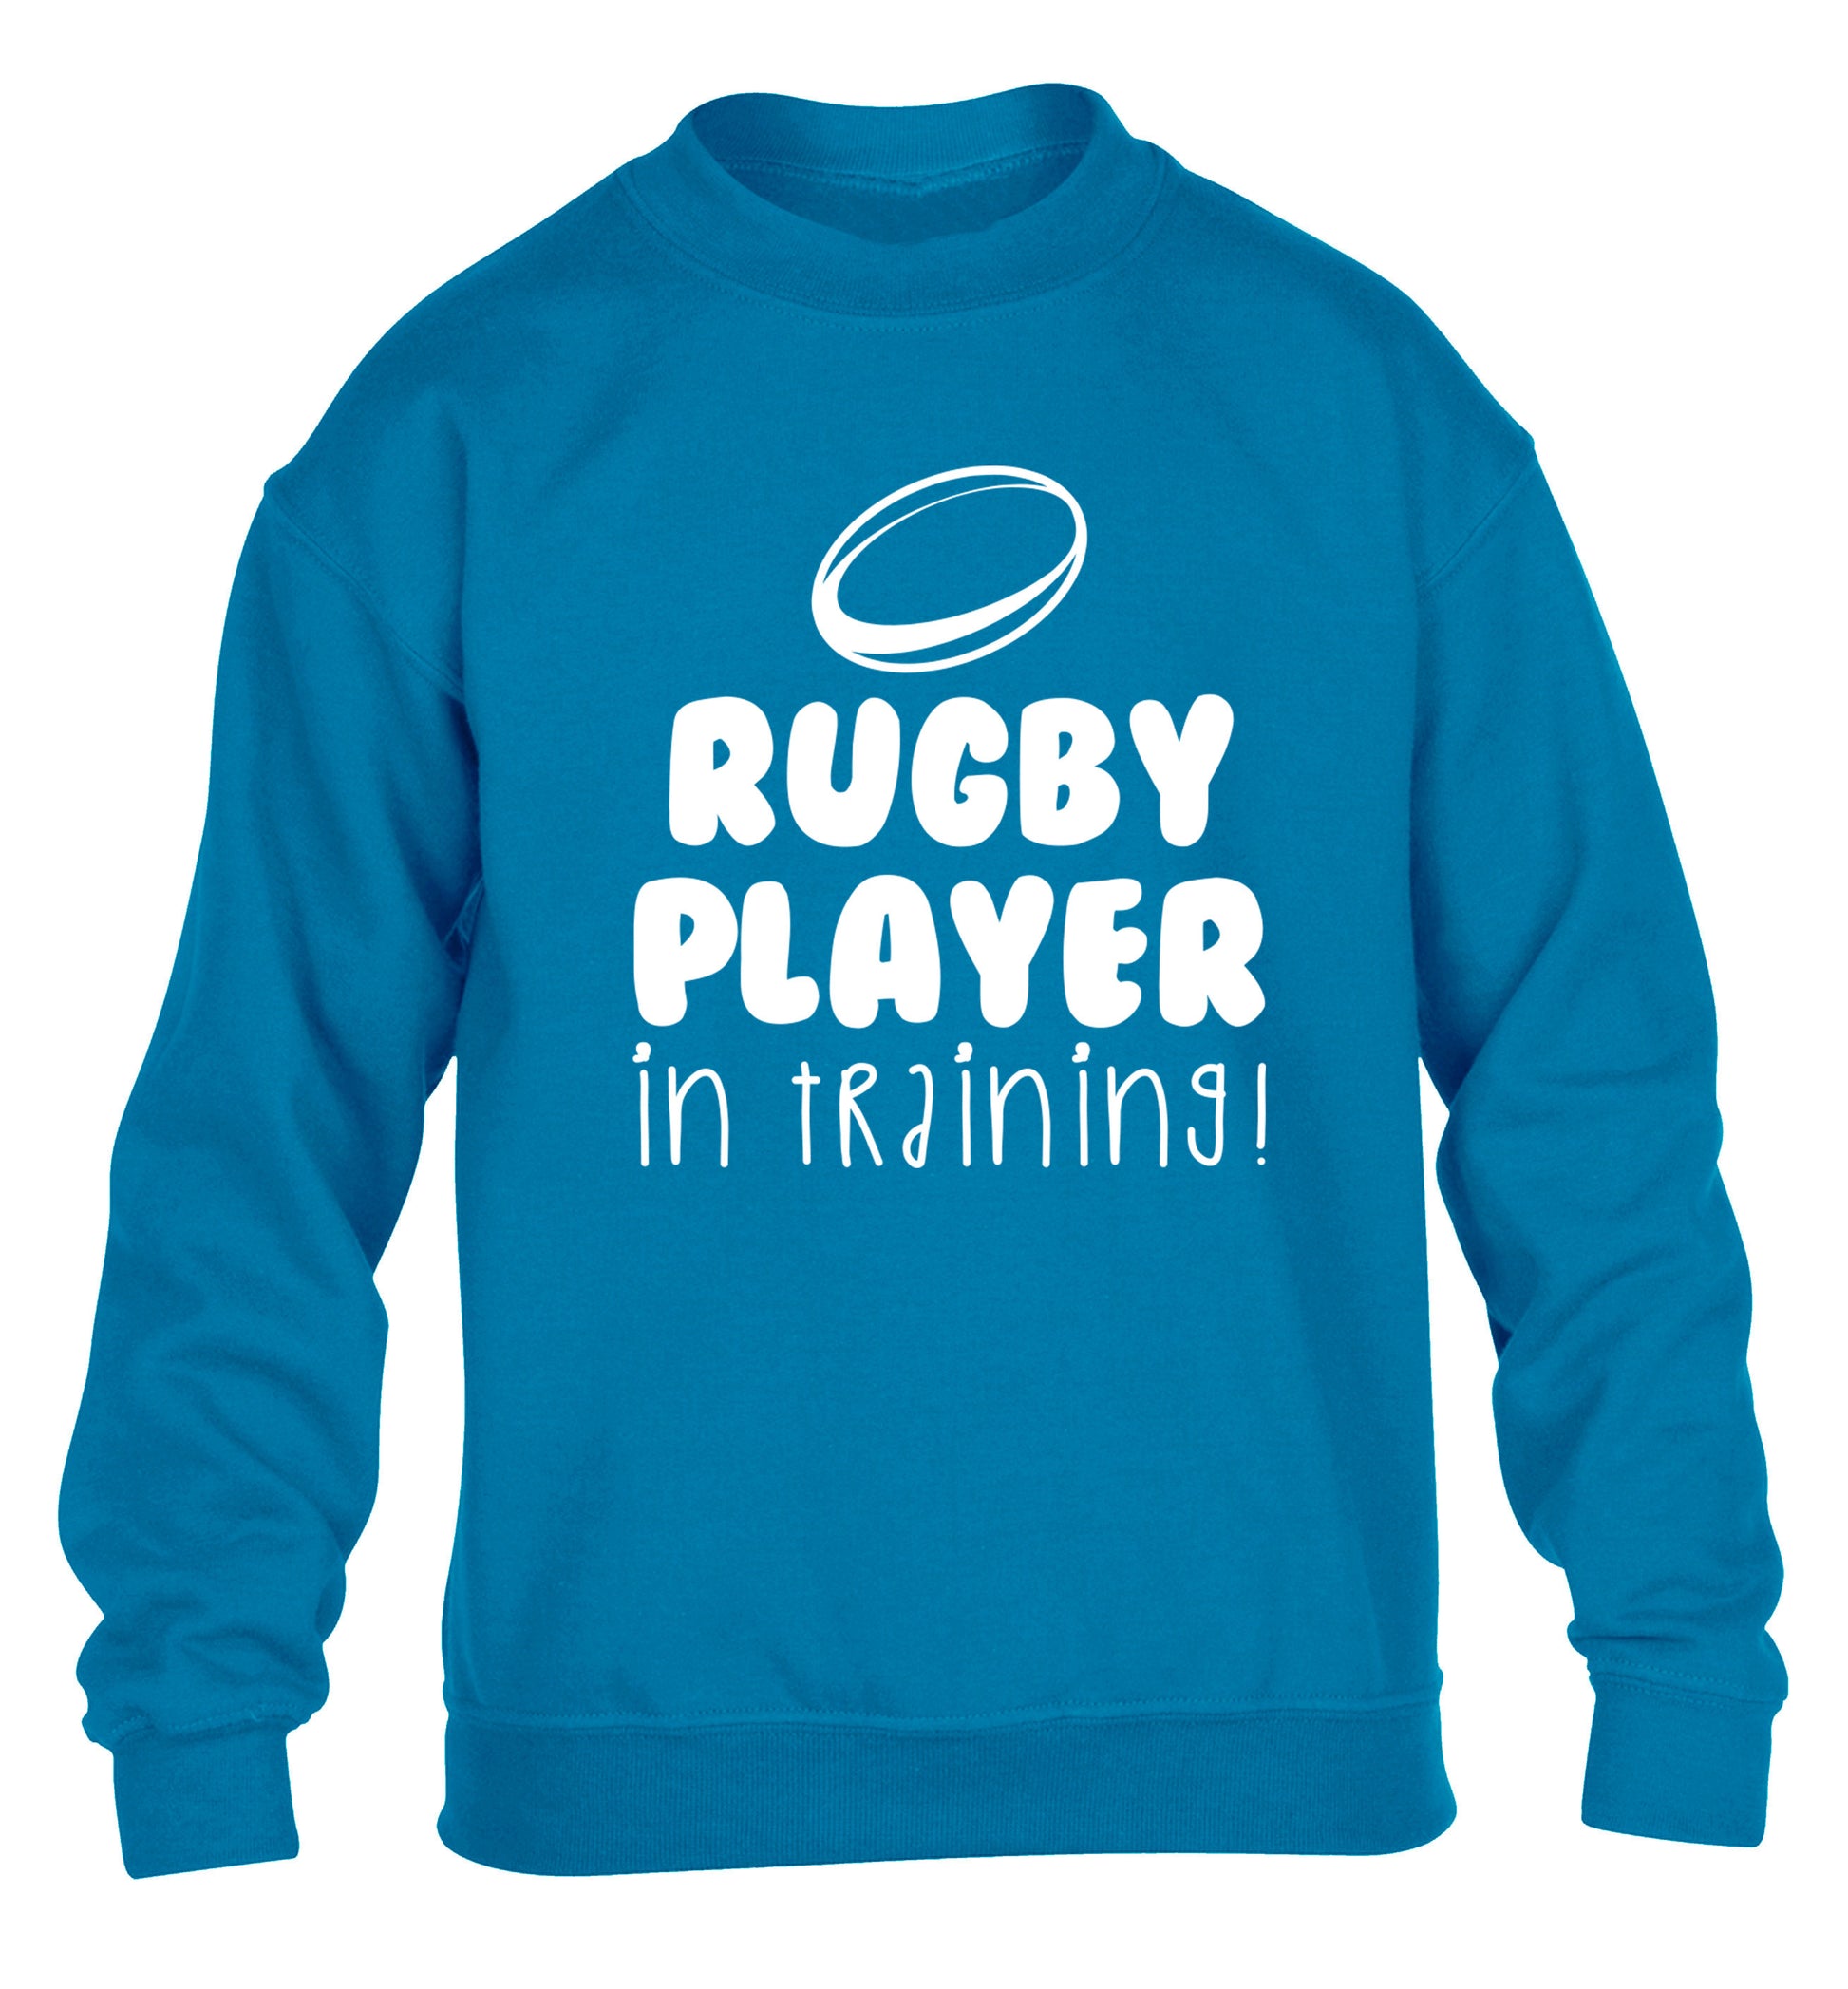 Rugby player in training children's blue sweater 12-14 Years